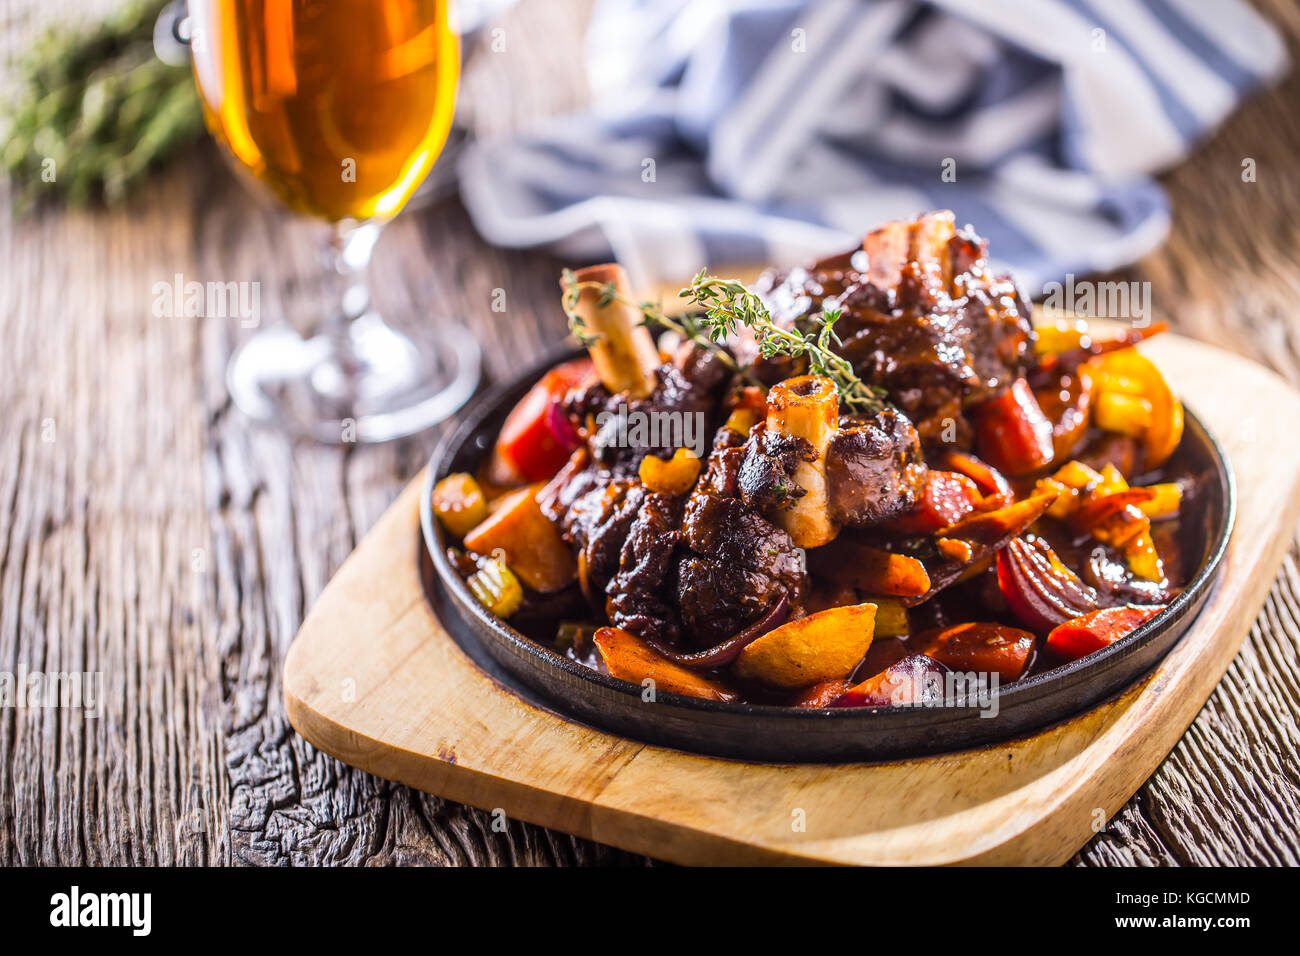 Lamb shank.Confit lamb shank with potatoes vegetable and draft beer in pub hotel or restaurant. Stock Photo